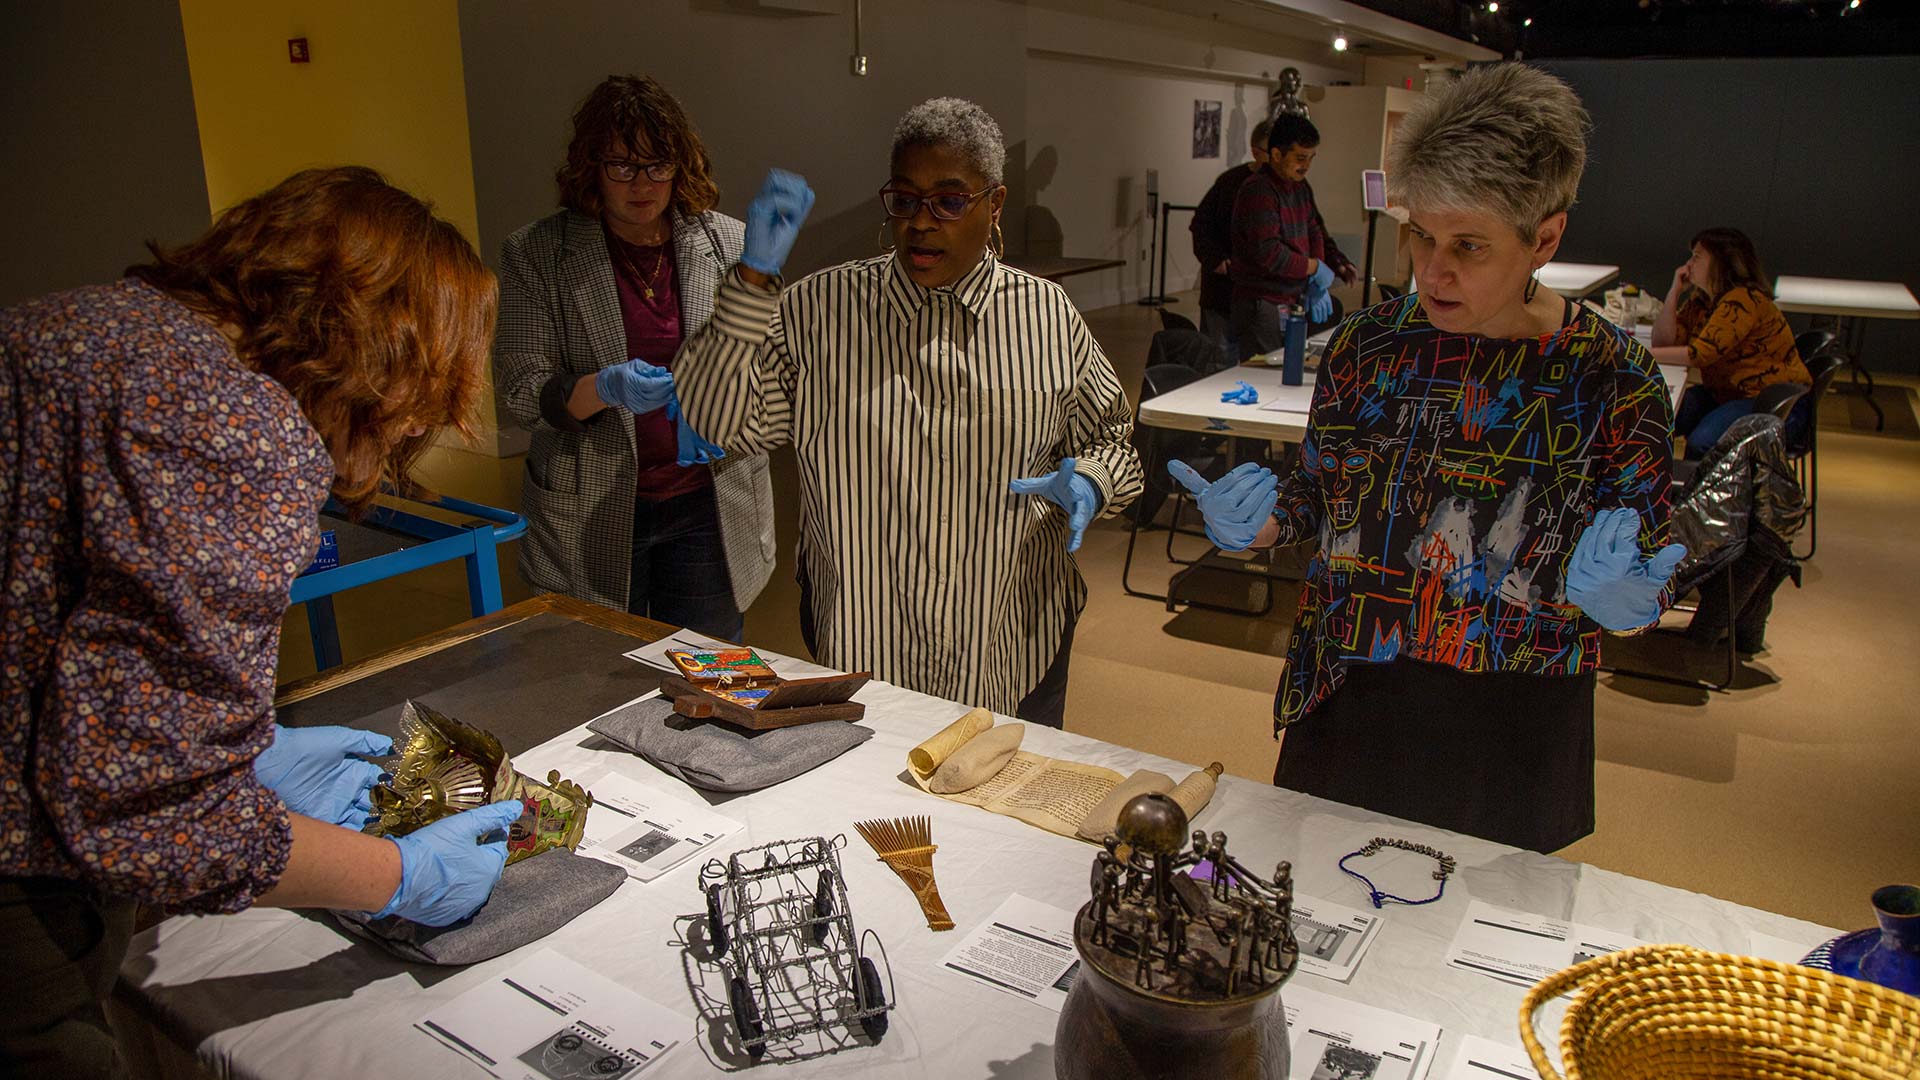 4 people with gloves discuss and examine a table of African objects inside a museum exhibit space